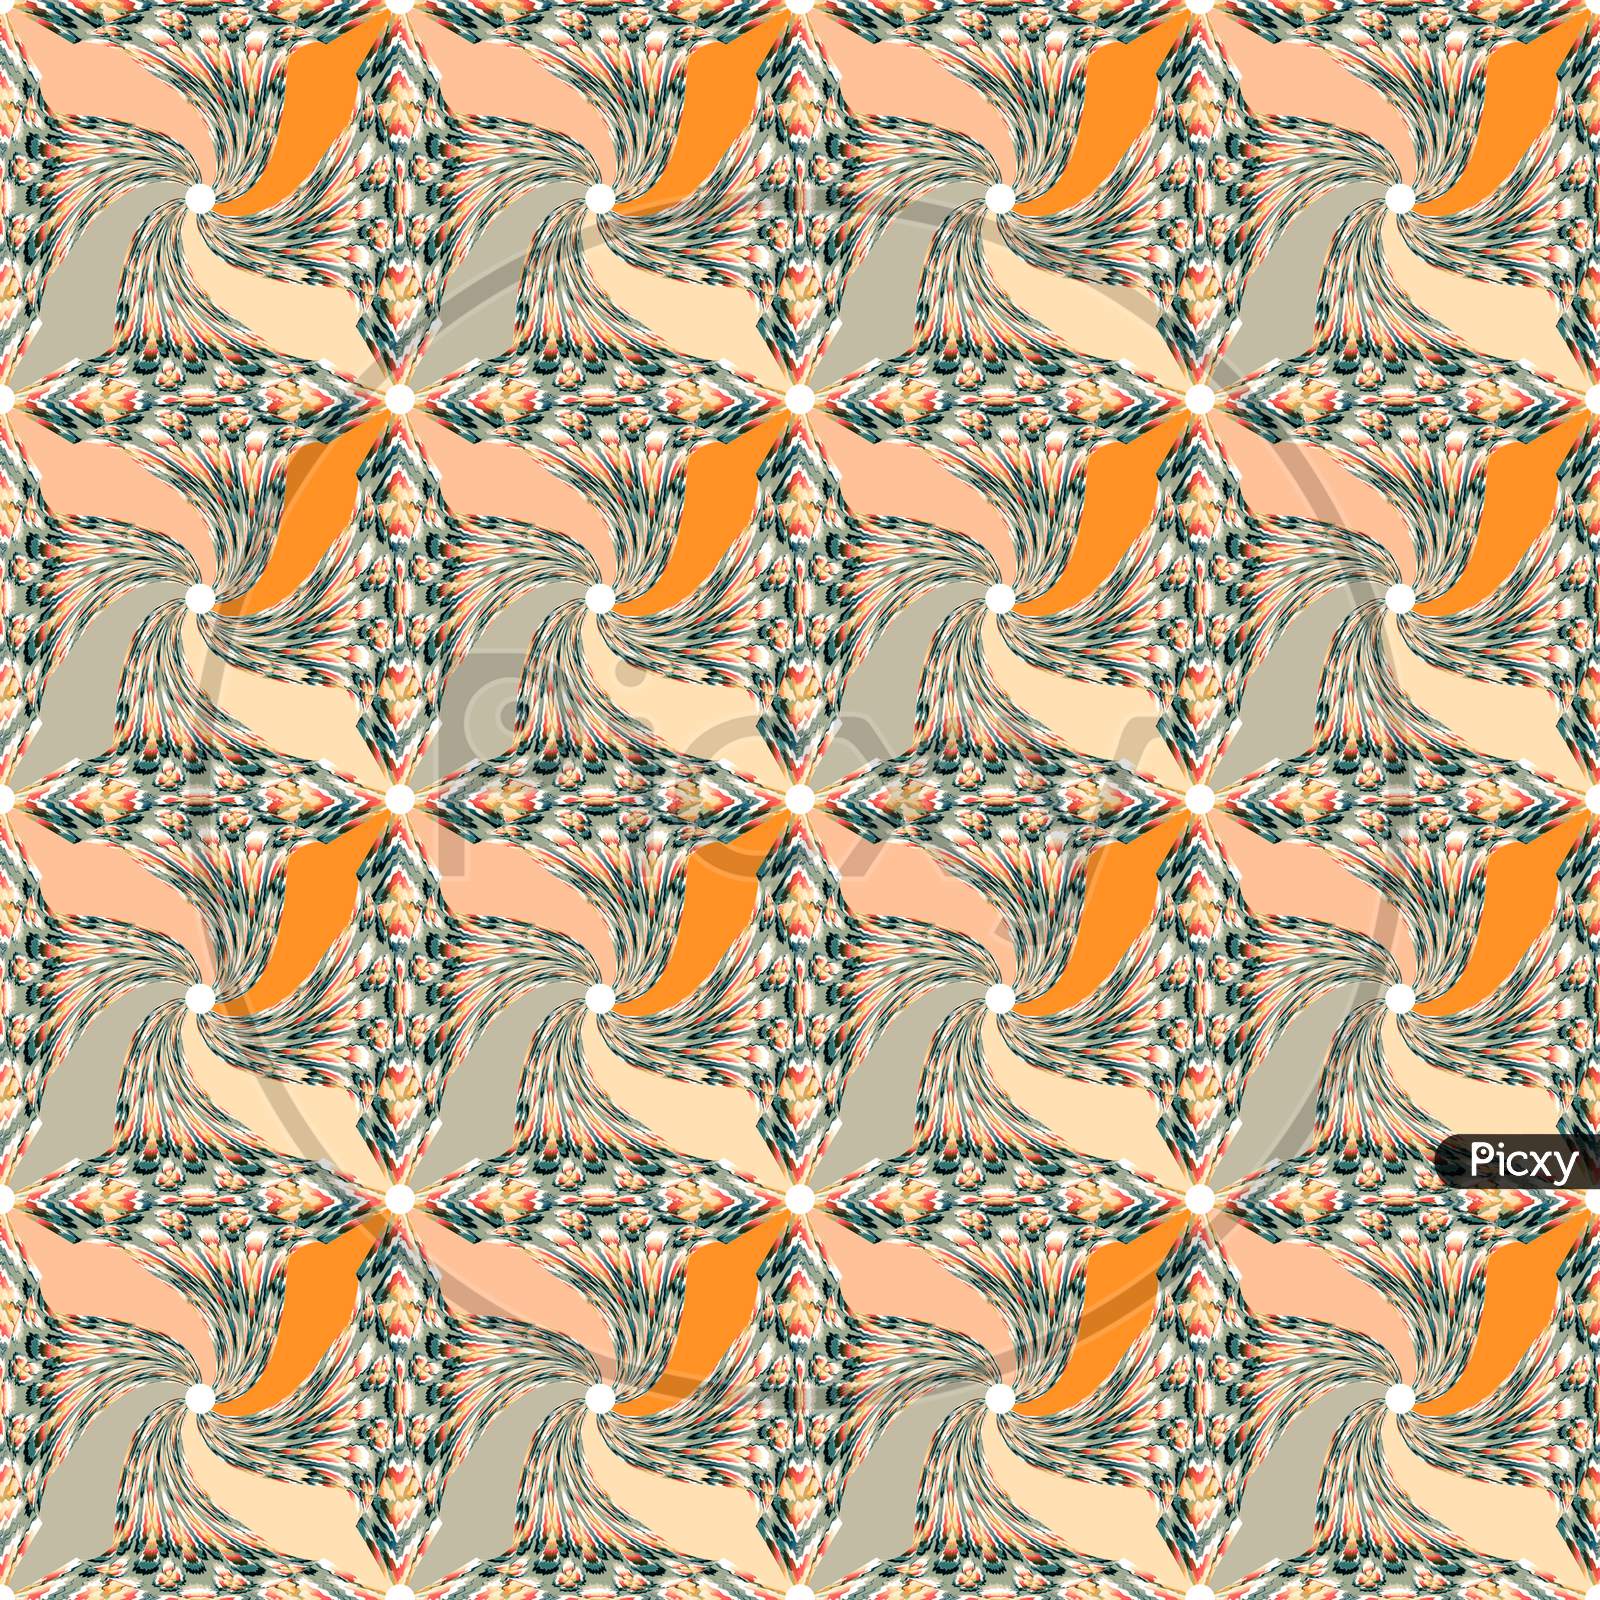 Colorful Fan Shaped Graphic Design Seamless Pattern